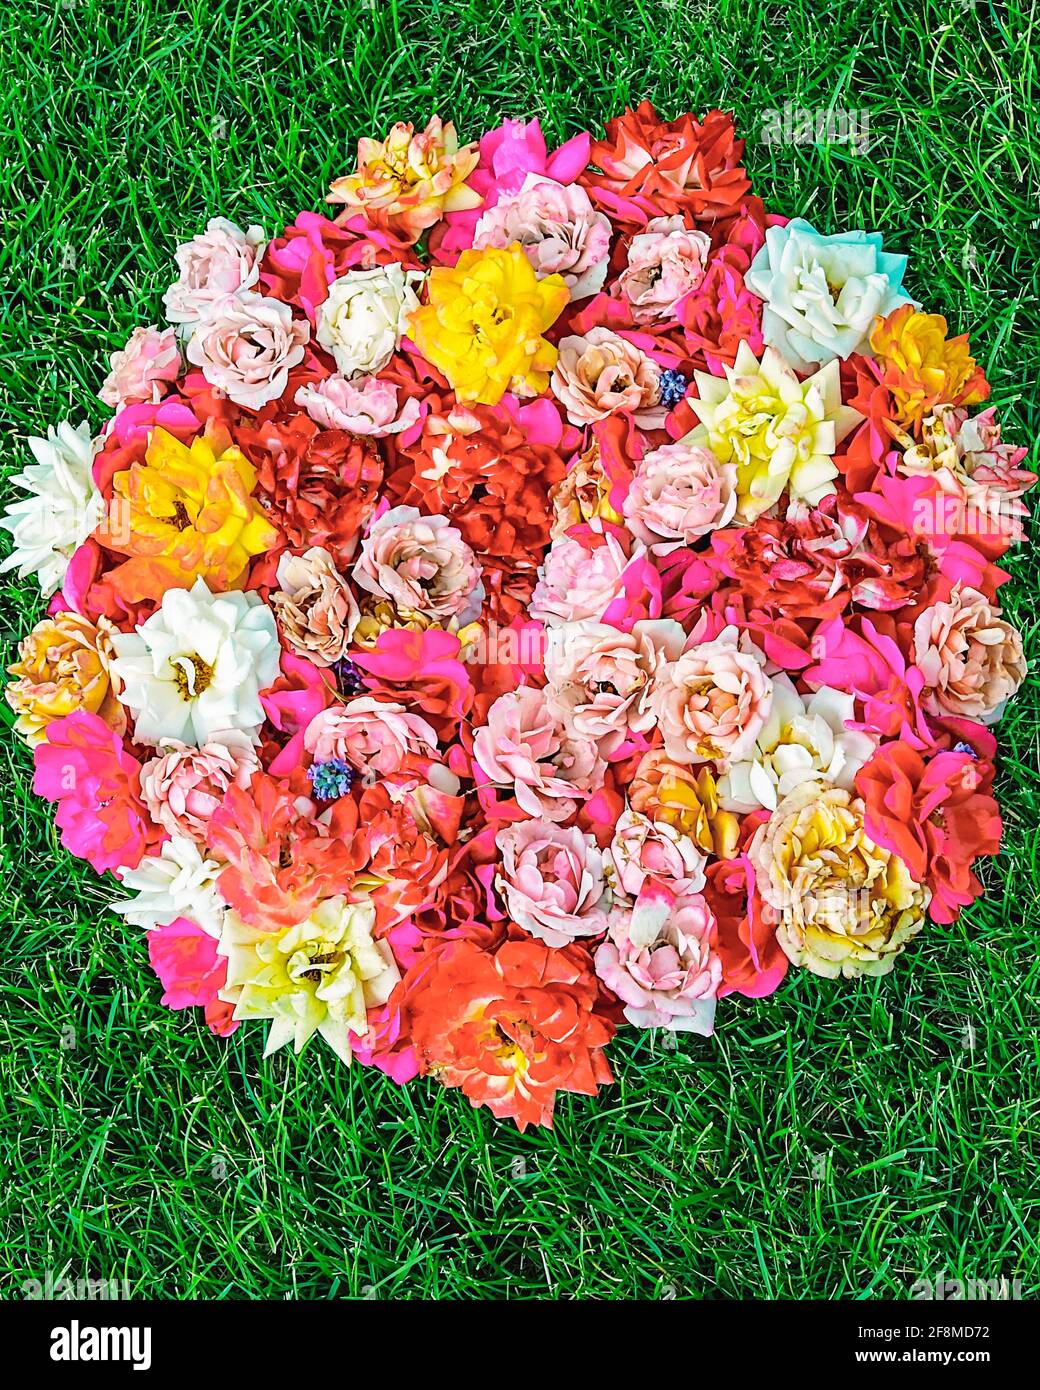 A bouquet of multicolored roses arraigned in a circle on the green summer grass Stock Photo